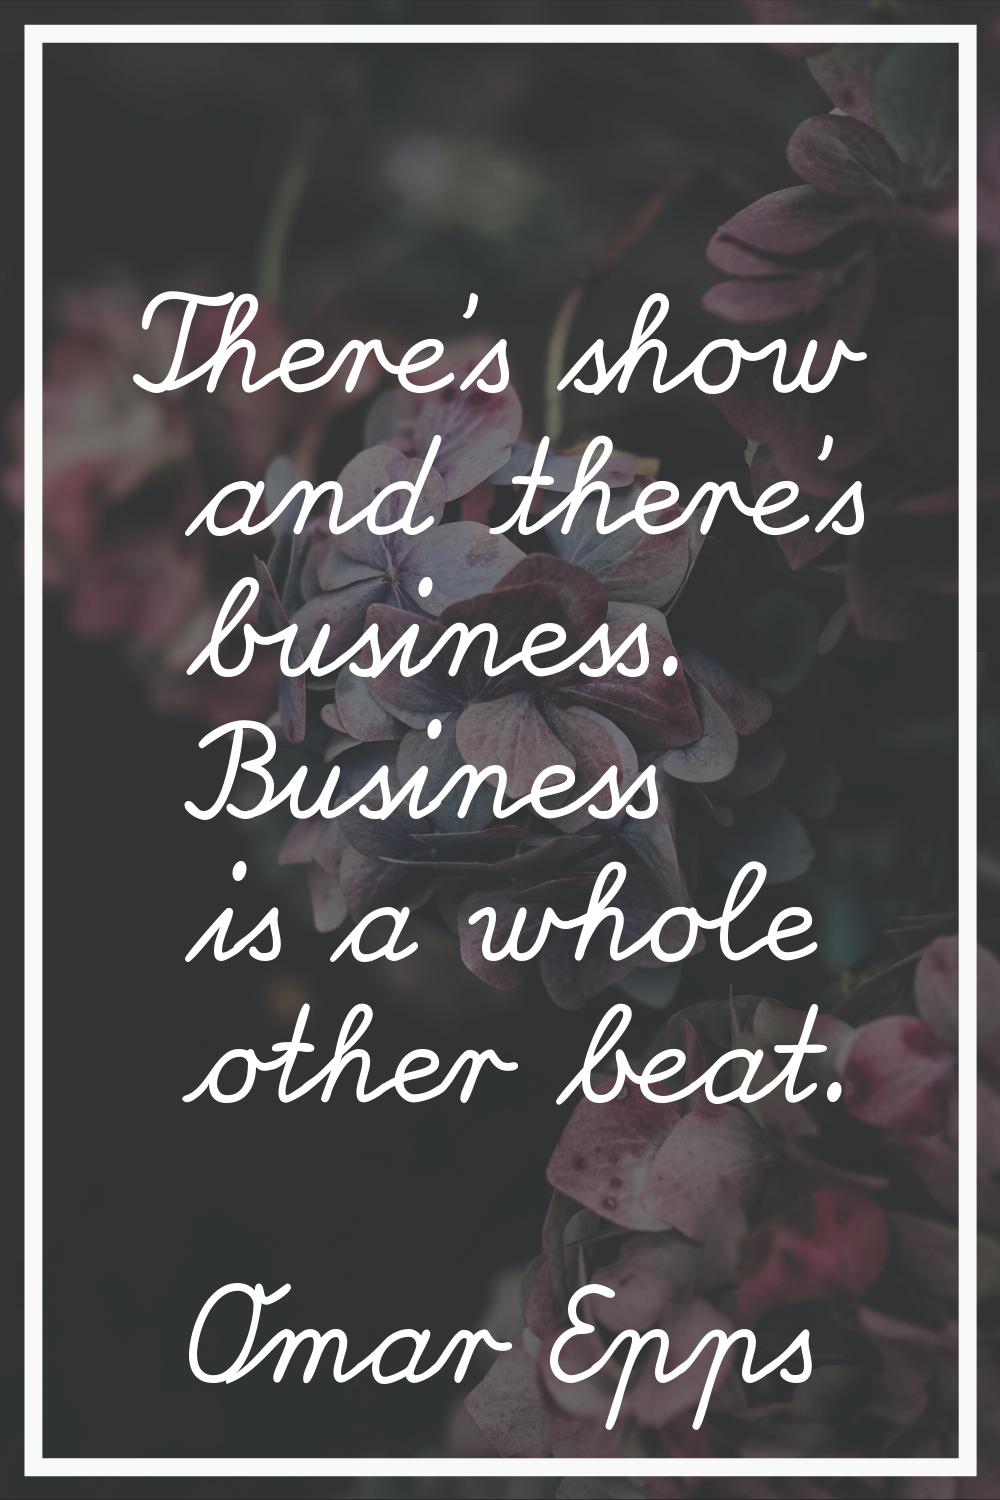 There's show and there's business. Business is a whole other beat.